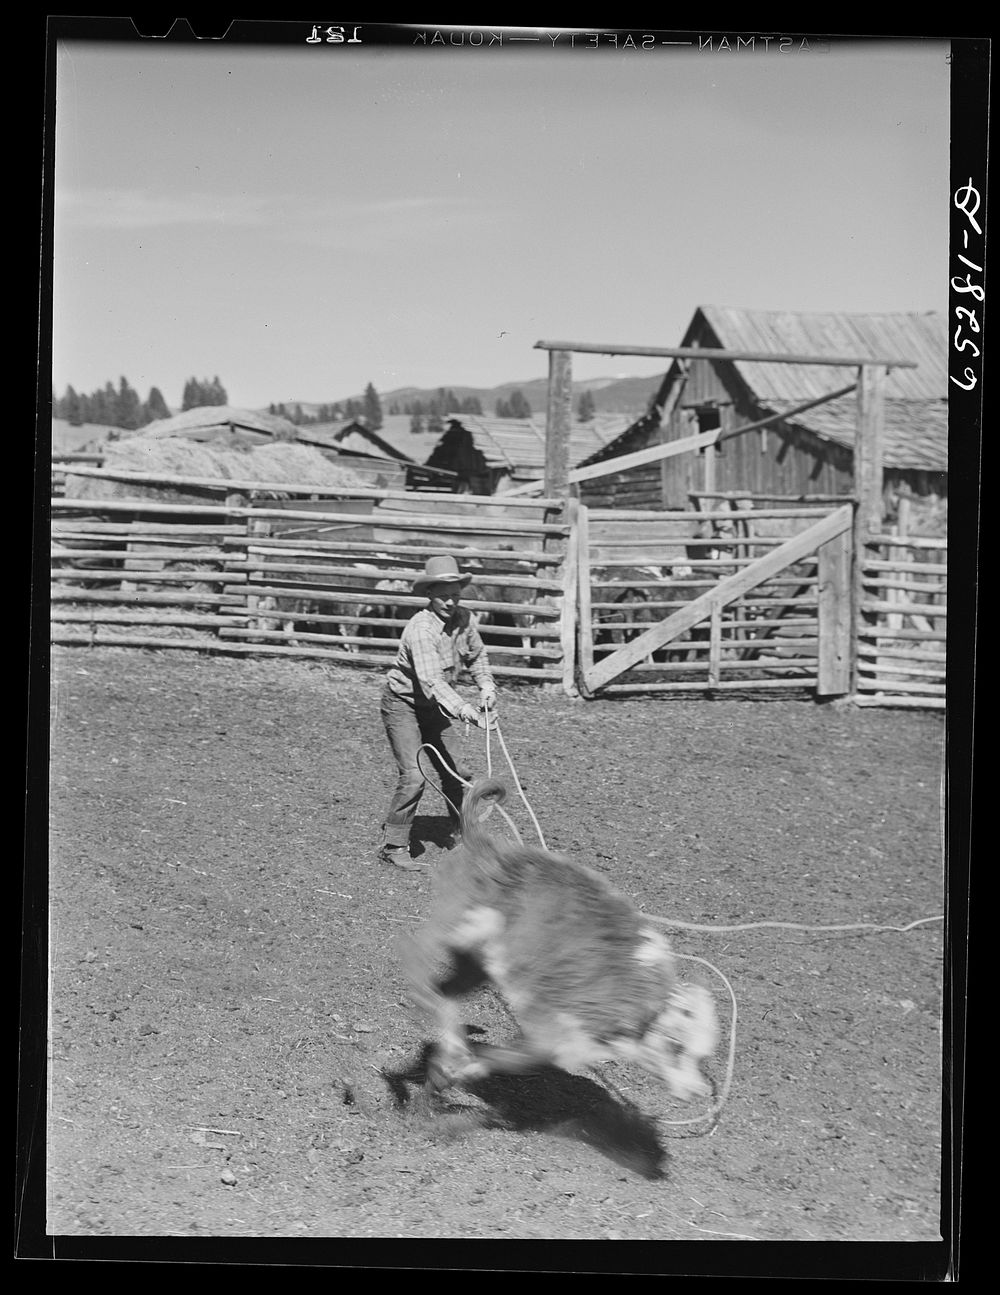 [Untitled photo, possibly related to: Bitterroot Valley, Montana. Roping a calf]. Sourced from the Library of Congress.